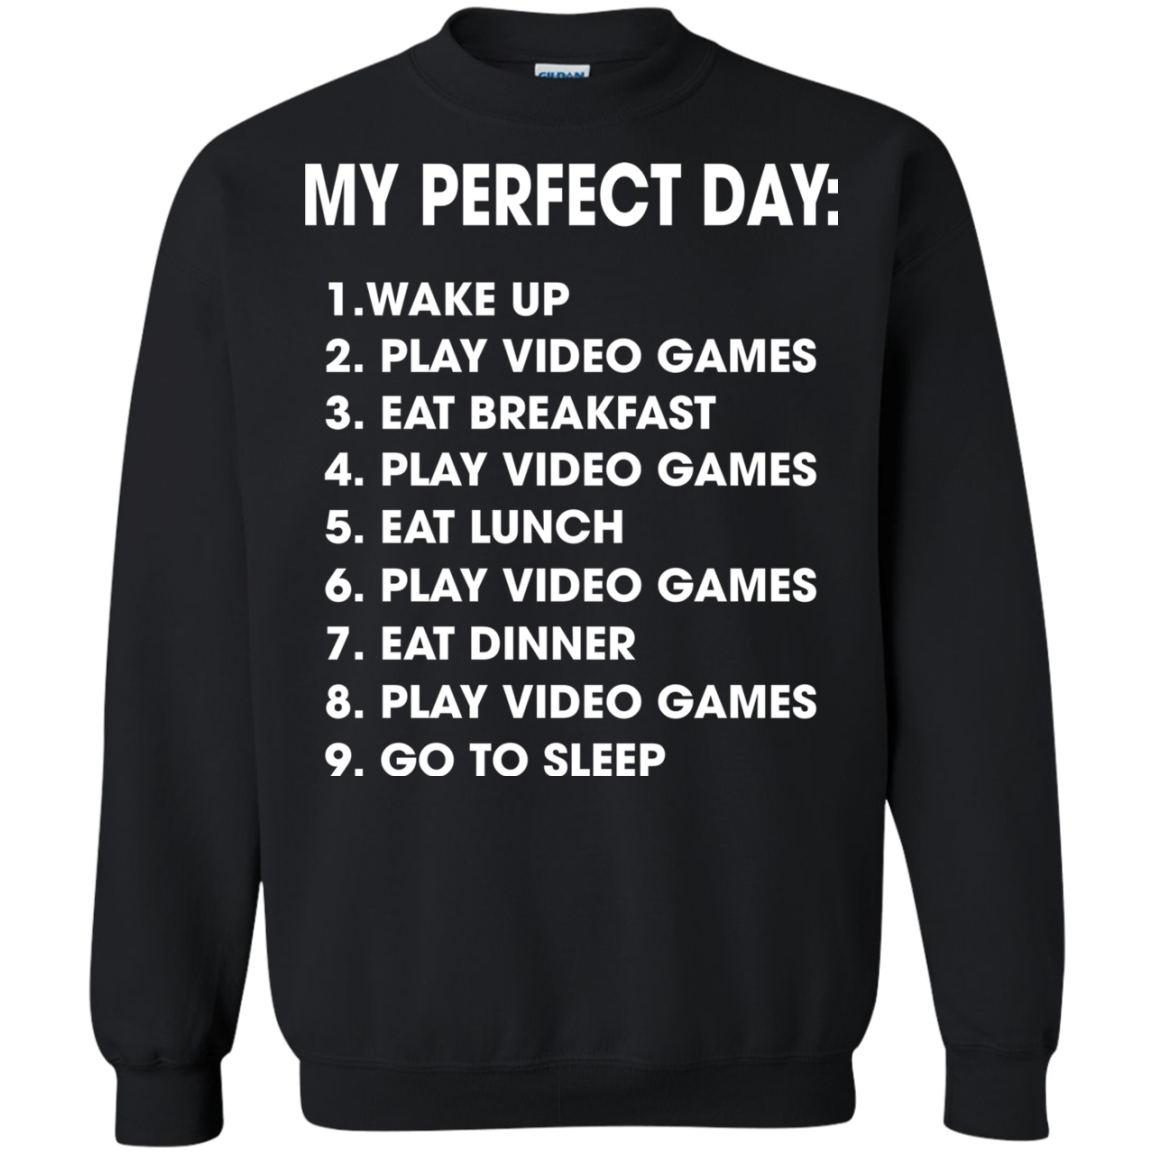 Every day perfect. My perfect Day. Группа perfect Day. My perfect Day story. My perfect Day essay.